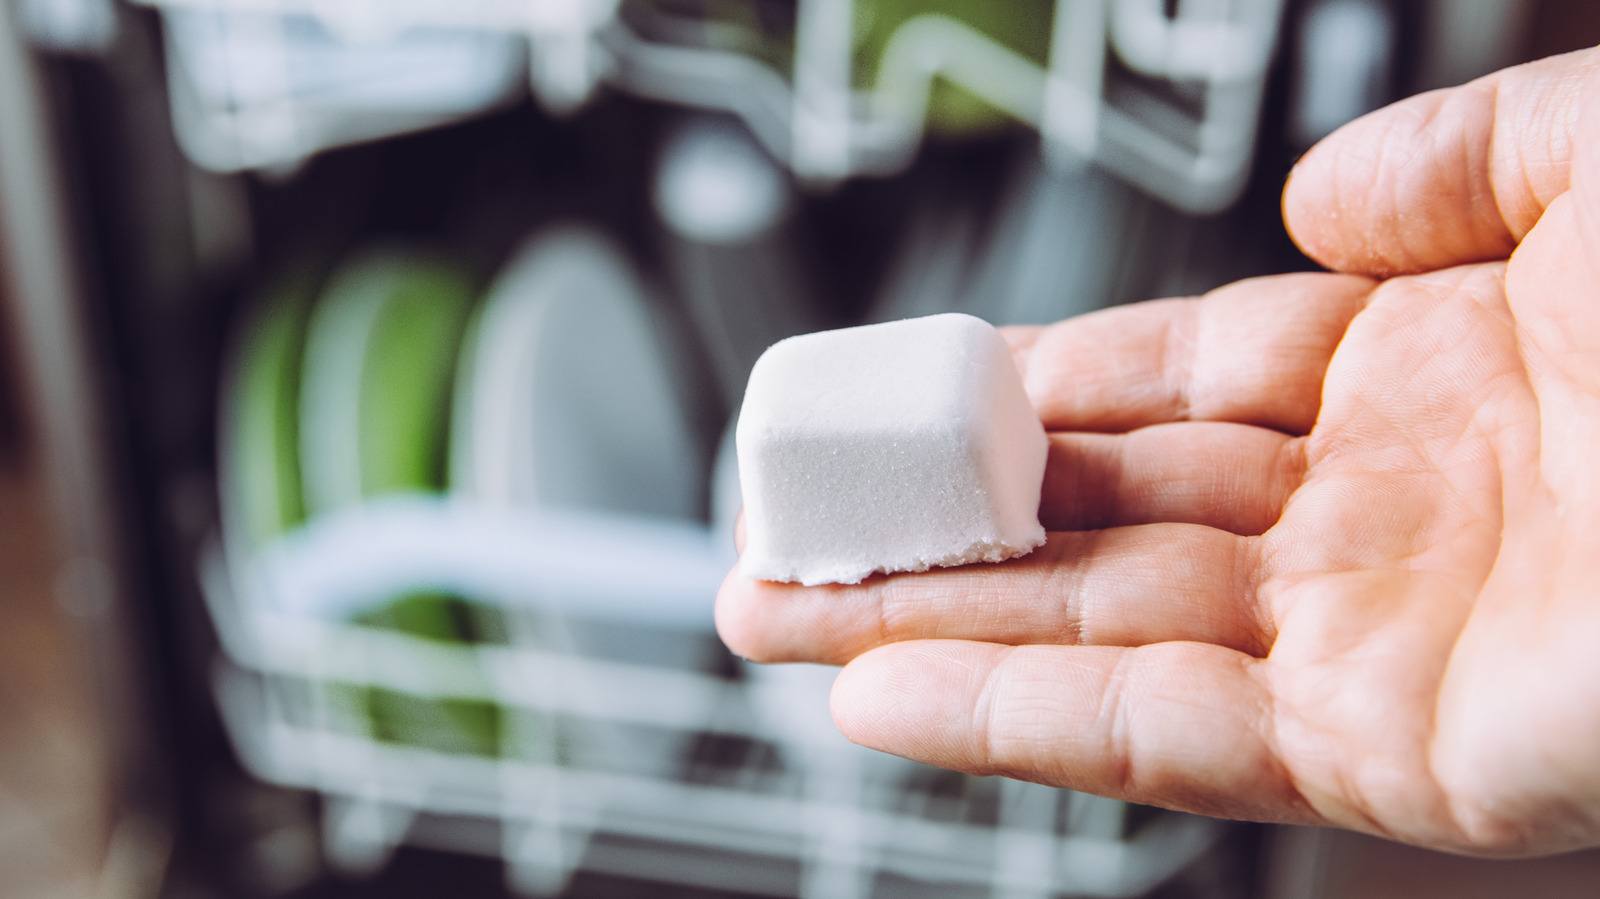 The Home Edit - Why transfer your dishwashing pods to